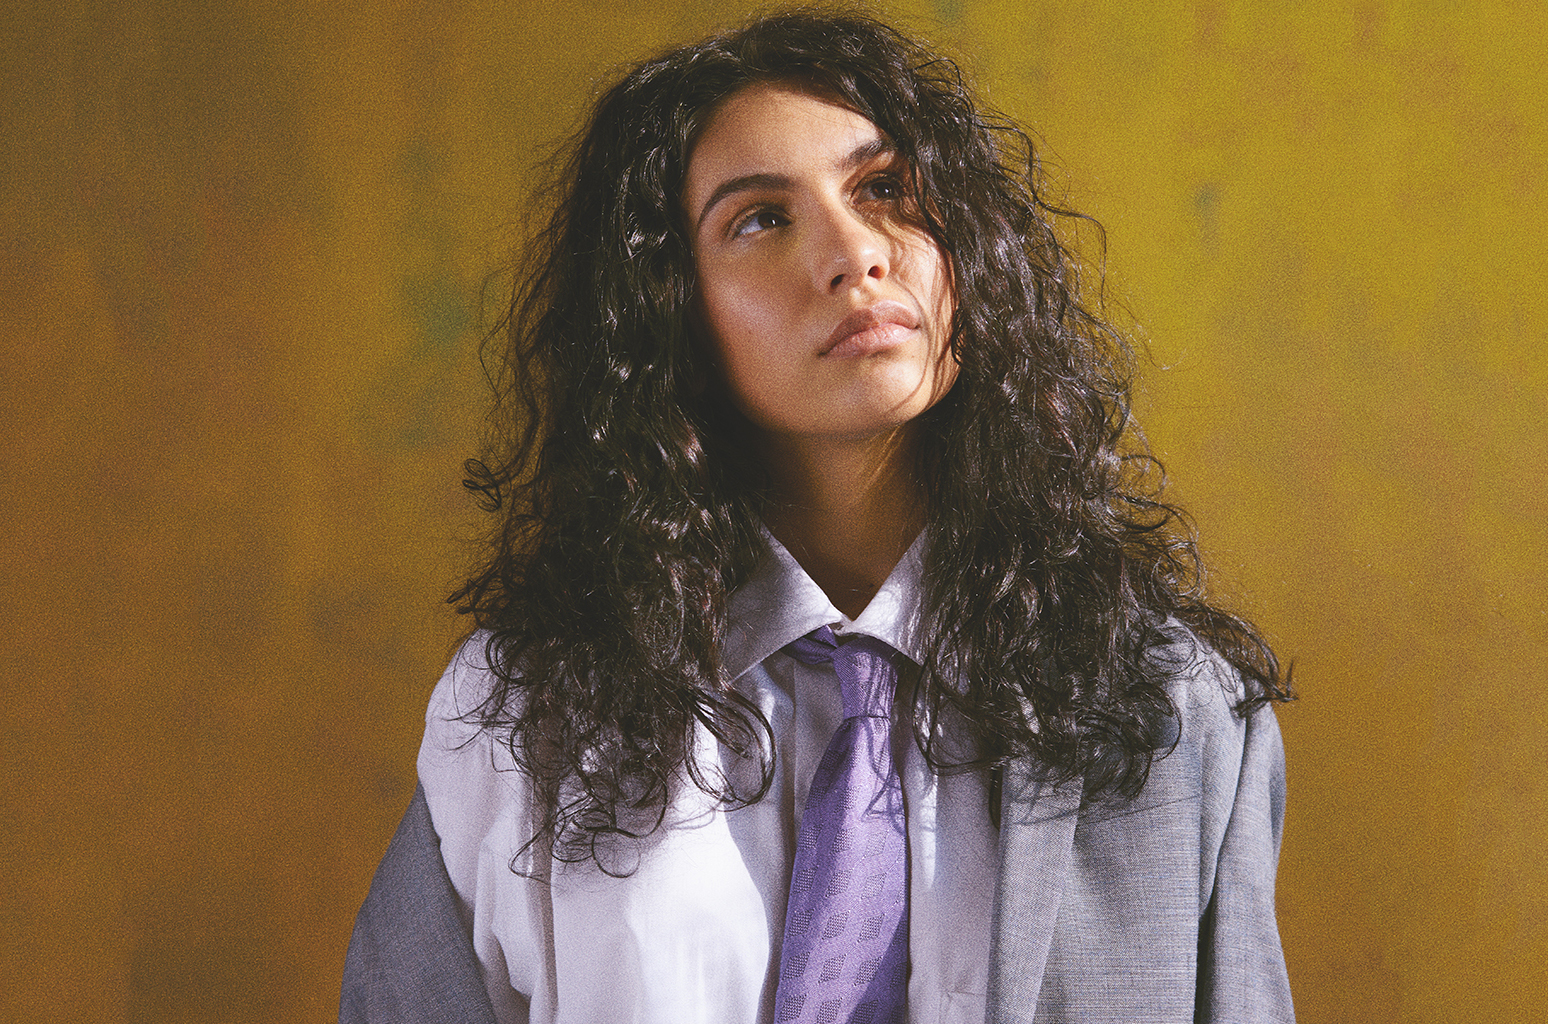 Alessia Cara Scars To Your Beautiful Audio Download Believerscompanion